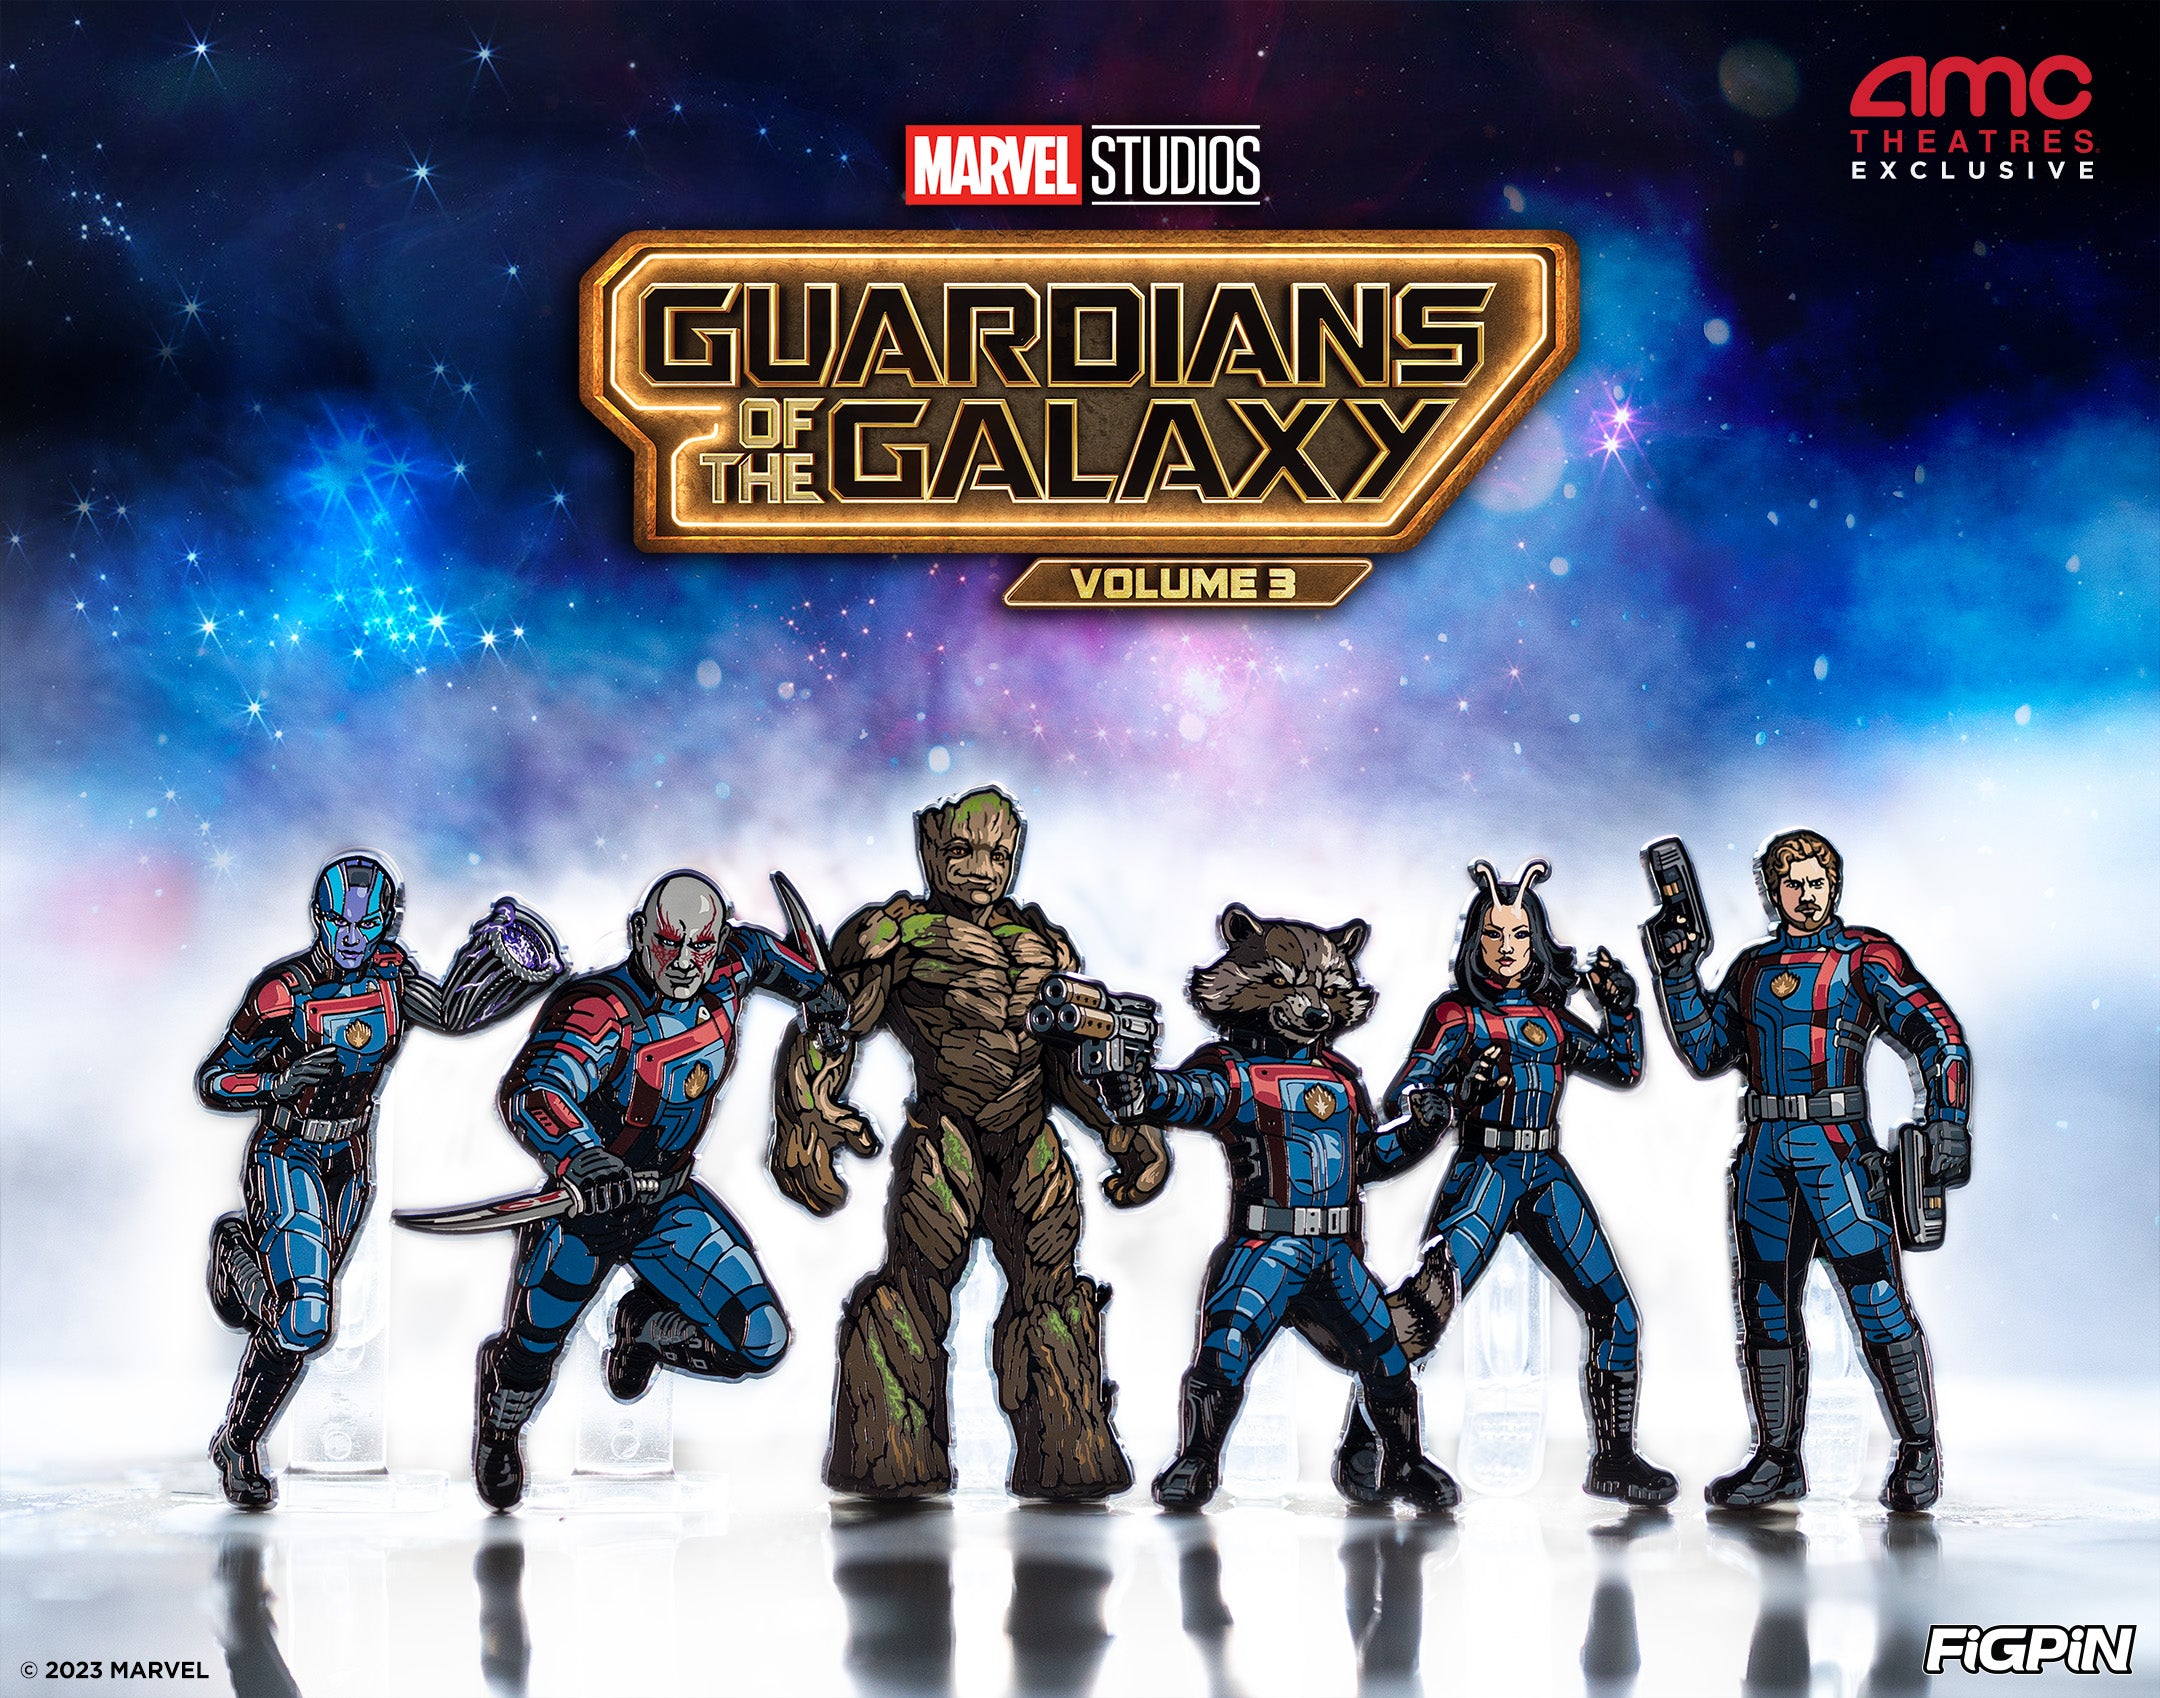 Marvel Studios’ Guardians of the Galaxy Vol. 3 Box Set is here!